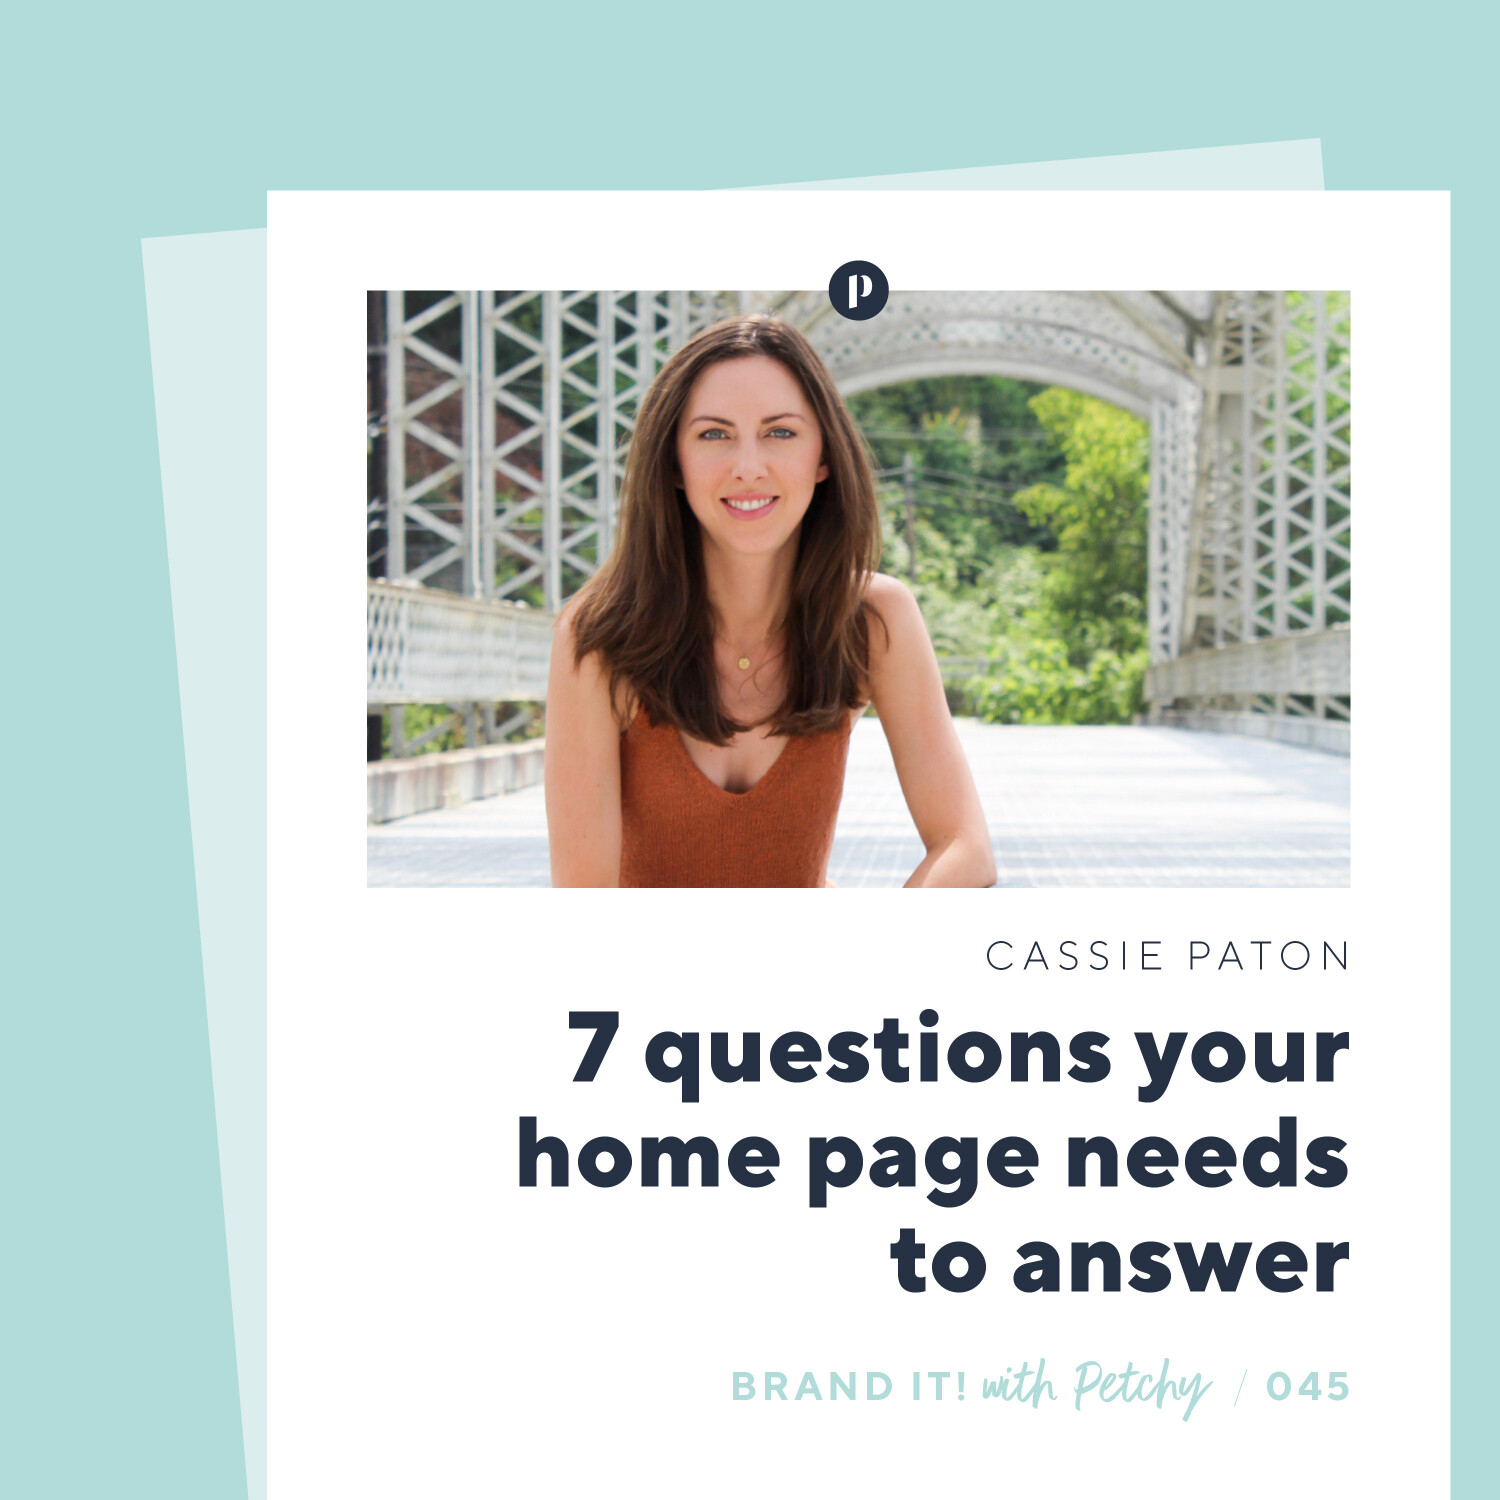 7 questions your home page needs to answer w/ Cassie Paton